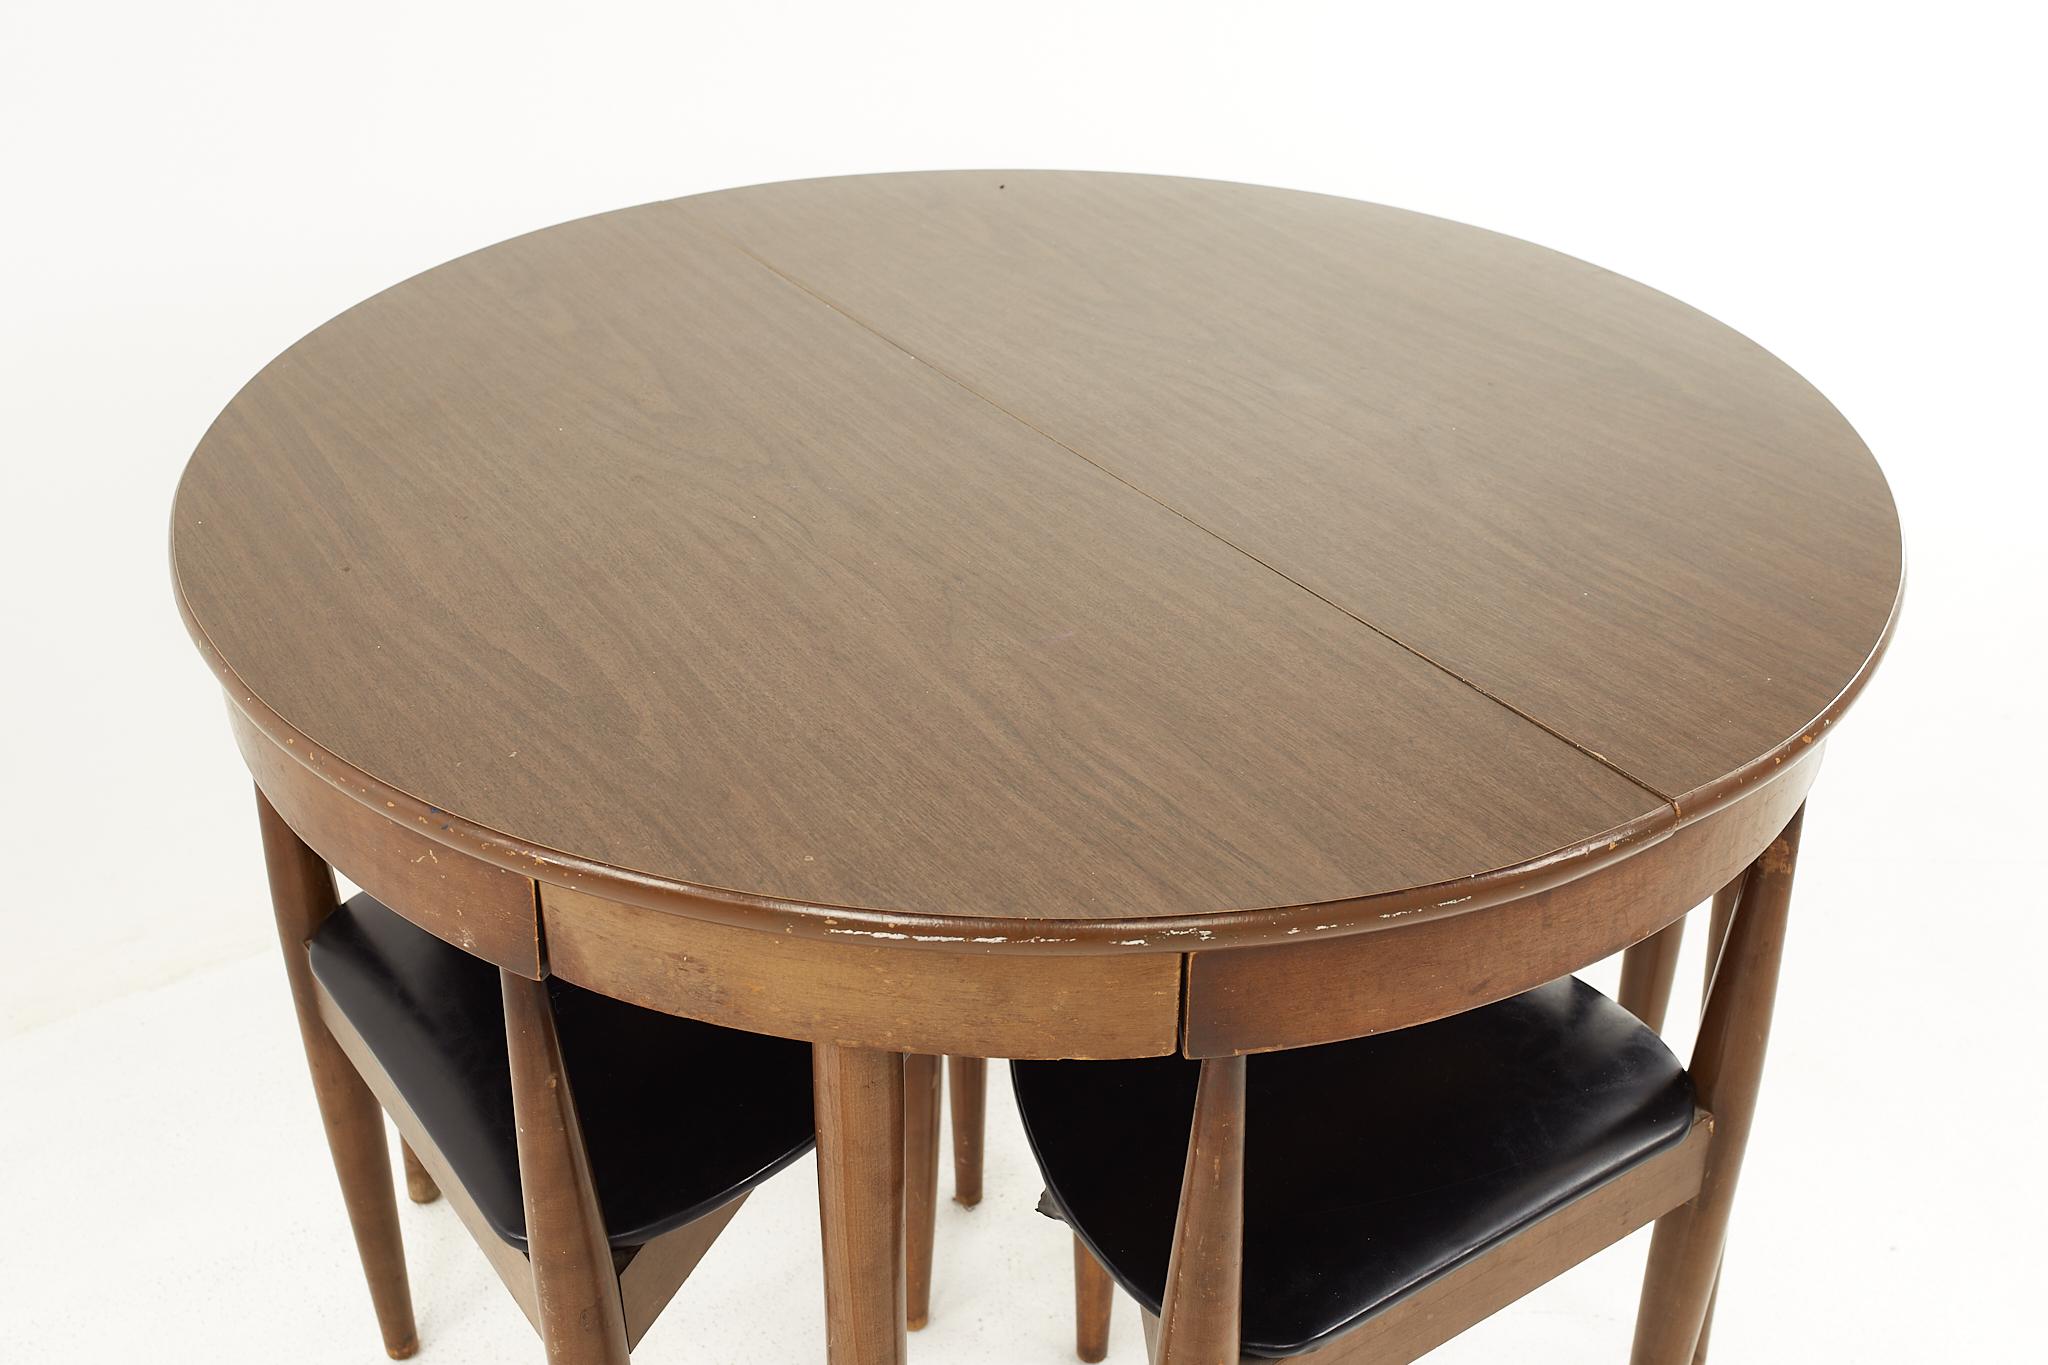 Late 20th Century Hans Olsen Style Walnut and Laminate Dining Table with 4 Nesting Chairs